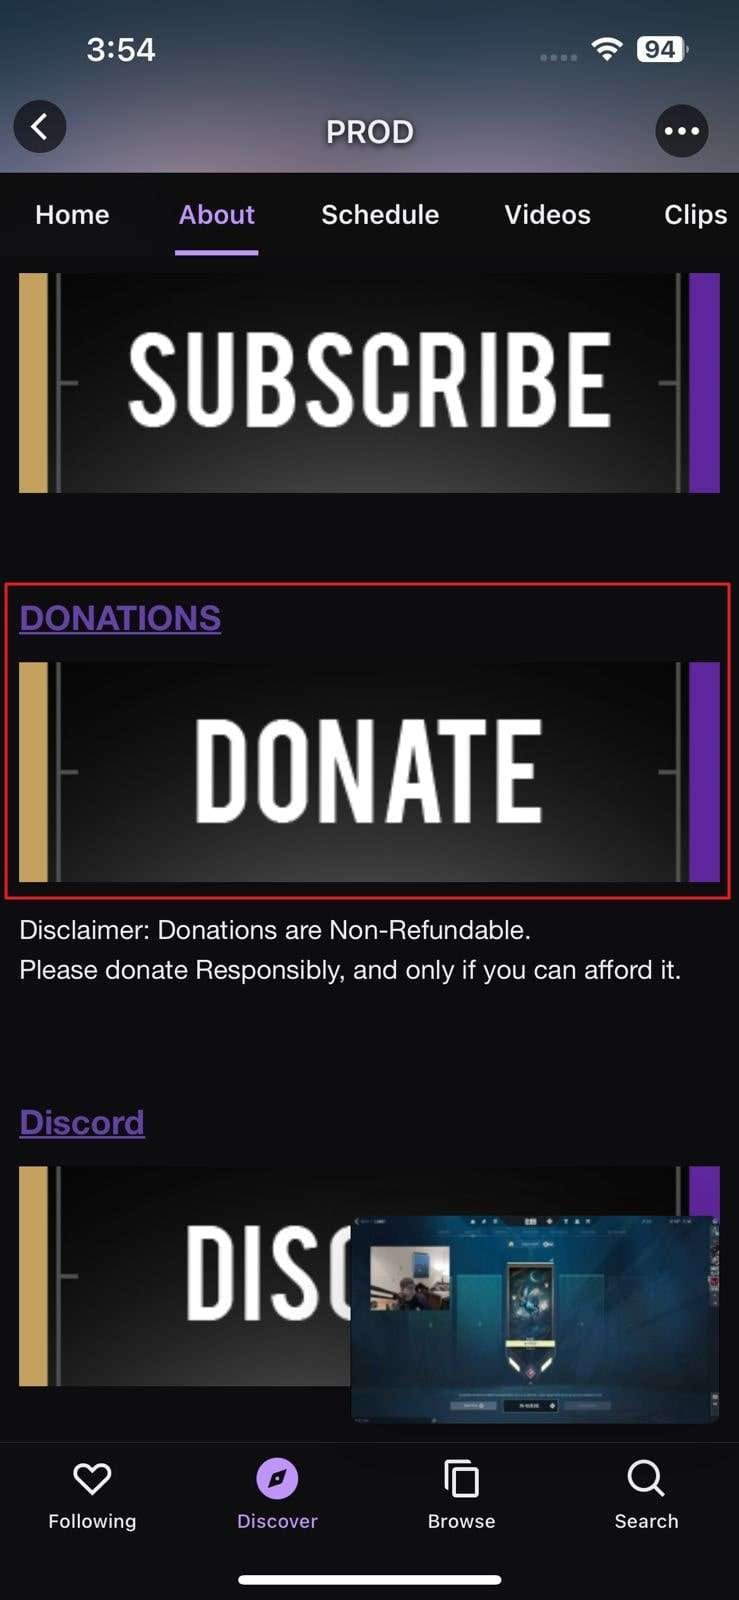 access the donate option